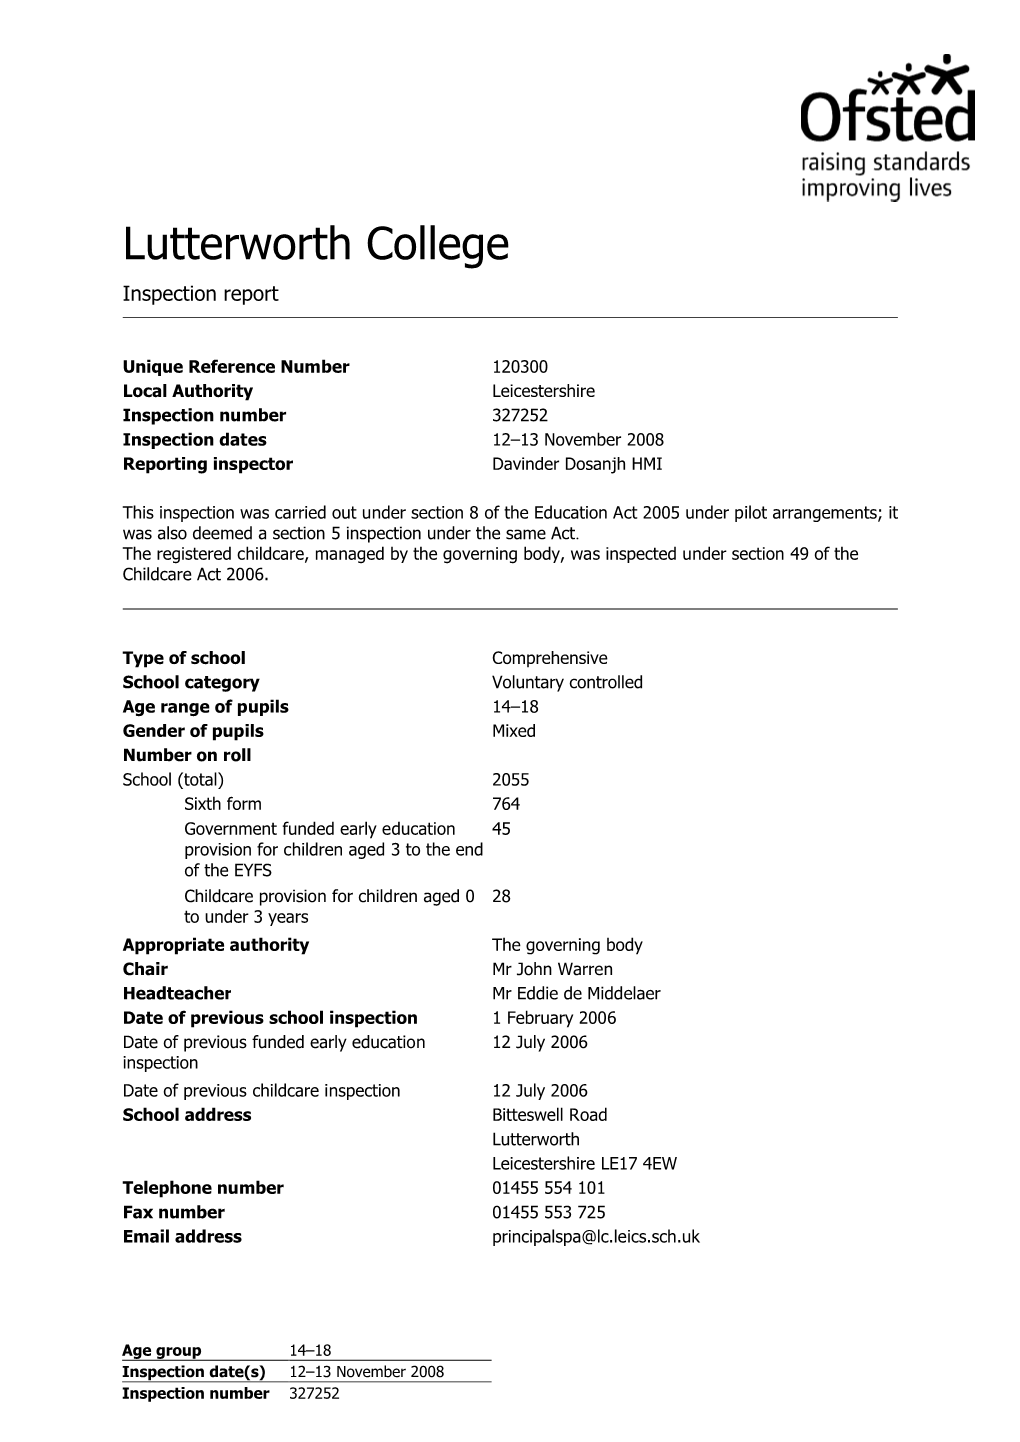 Lutterworth College Inspection Report